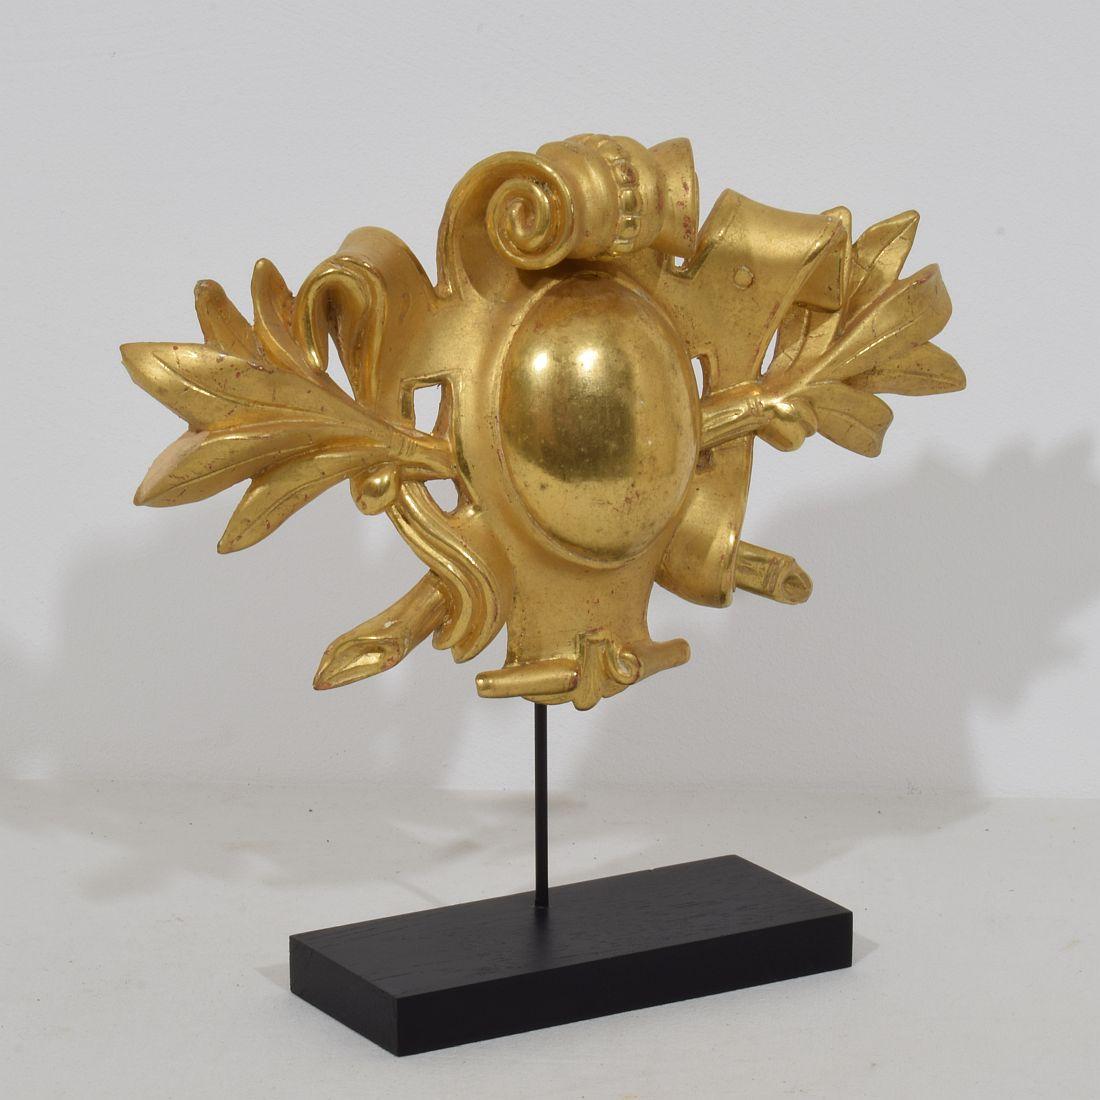 Hand-Carved Italian 19th Century Carved Giltwood Ornament